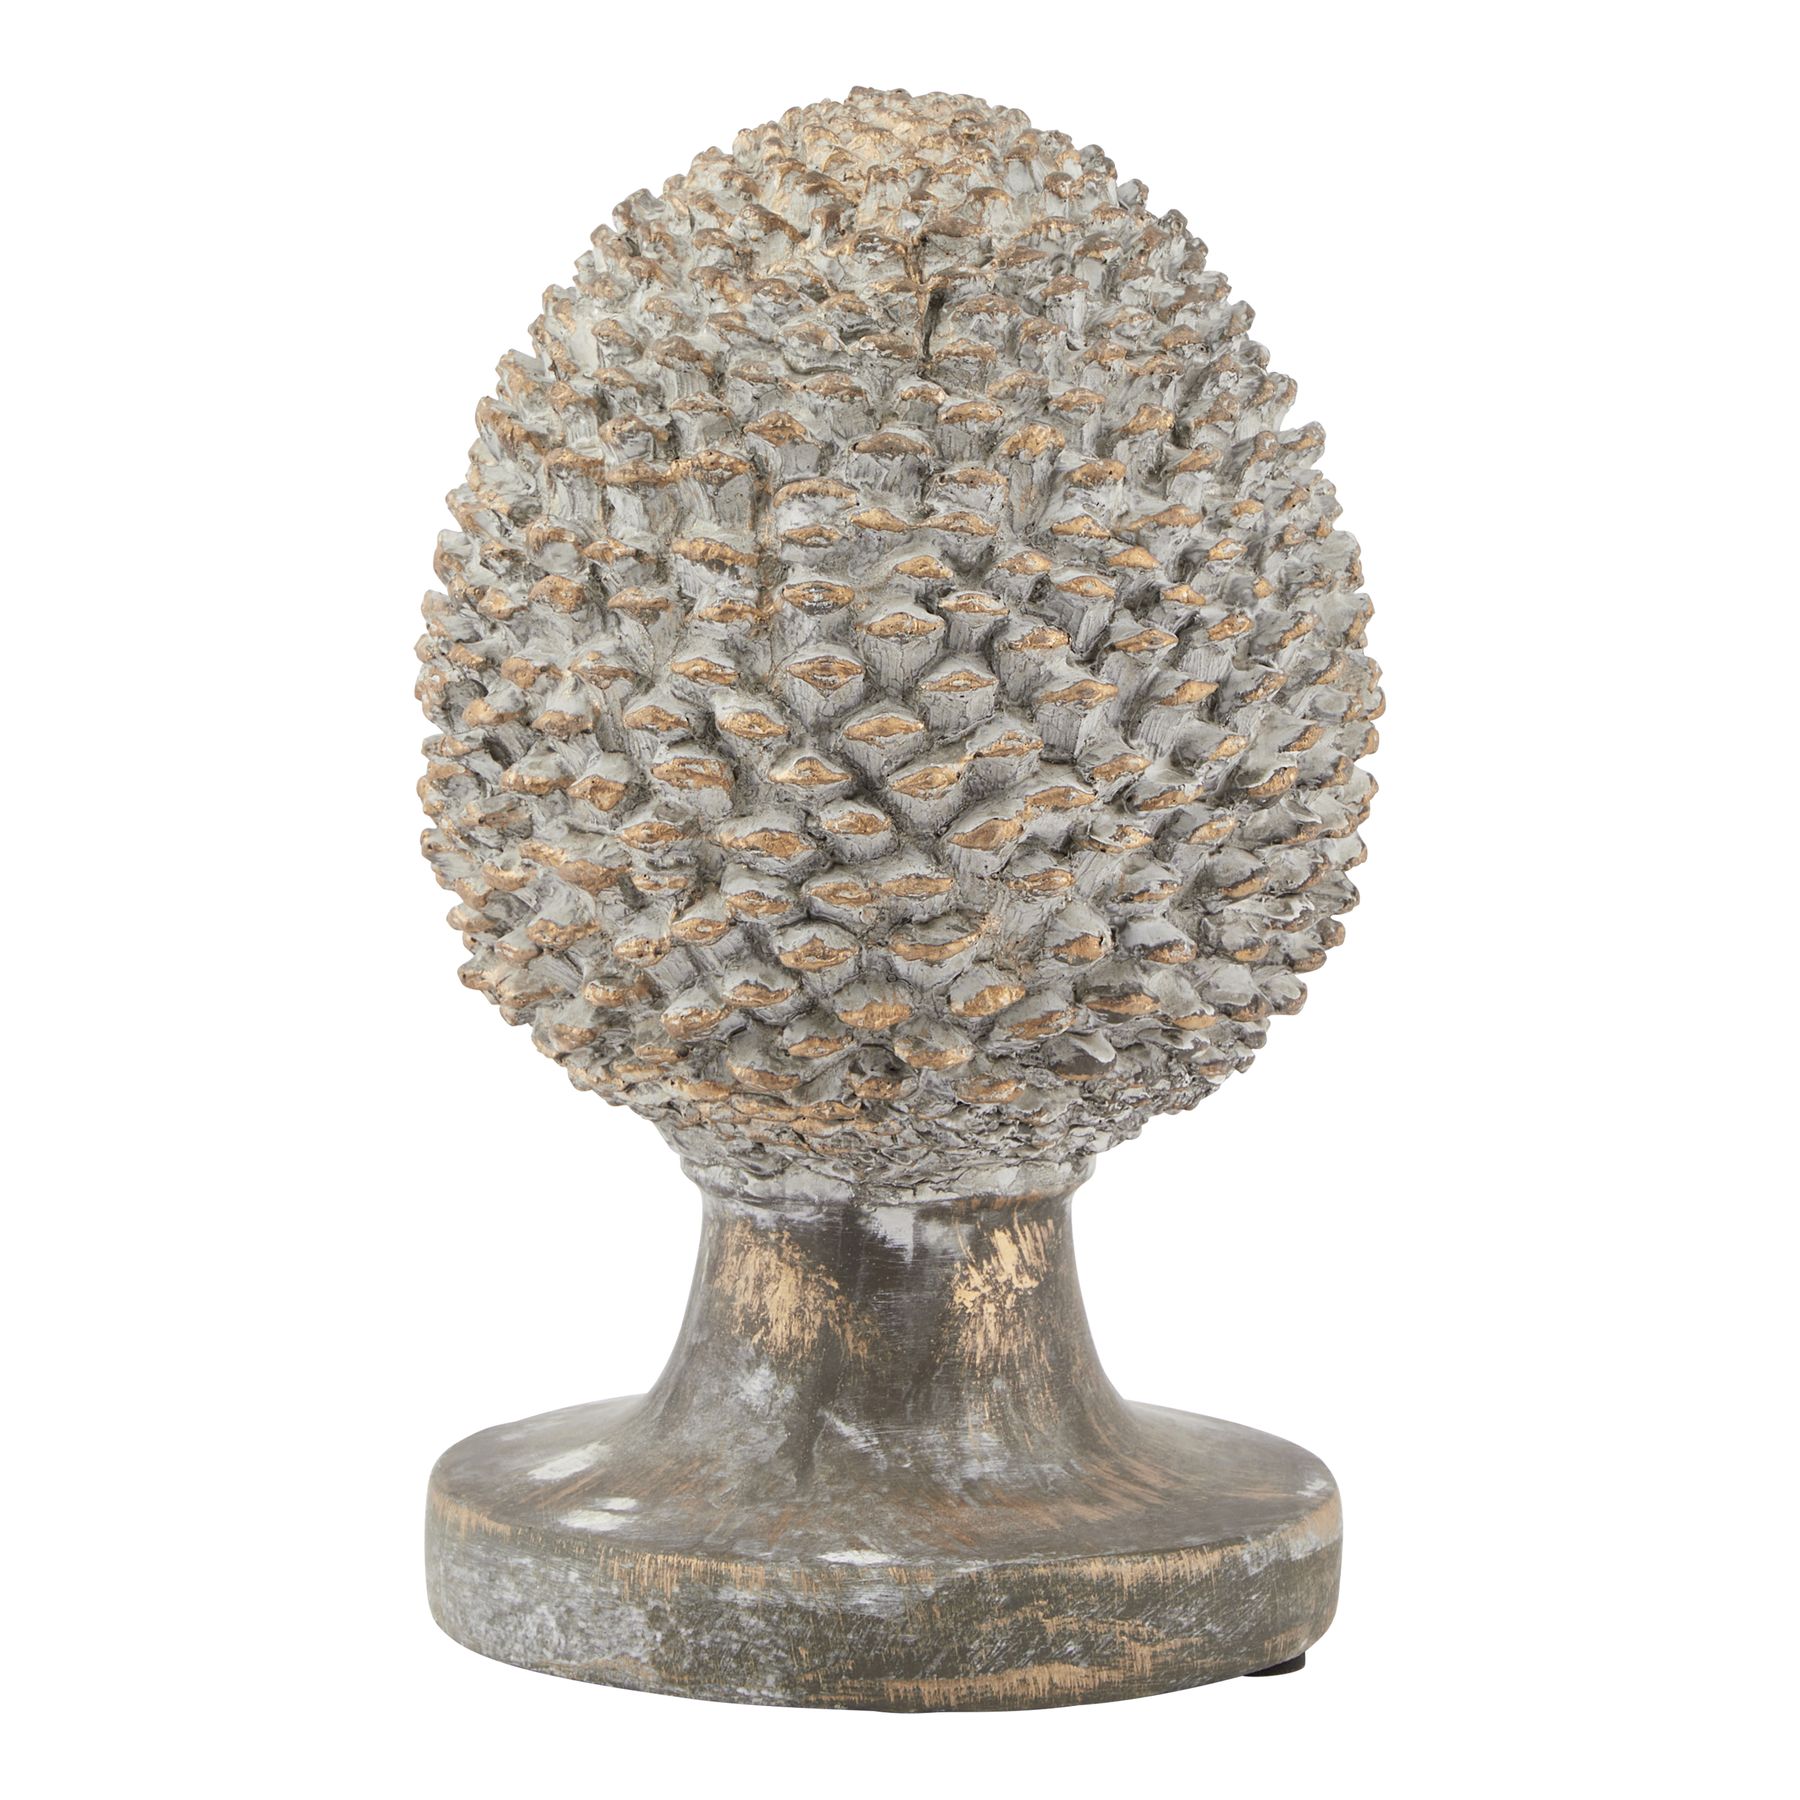 Stone Effect Pinecone Ornament With Gold Accents - Image 1